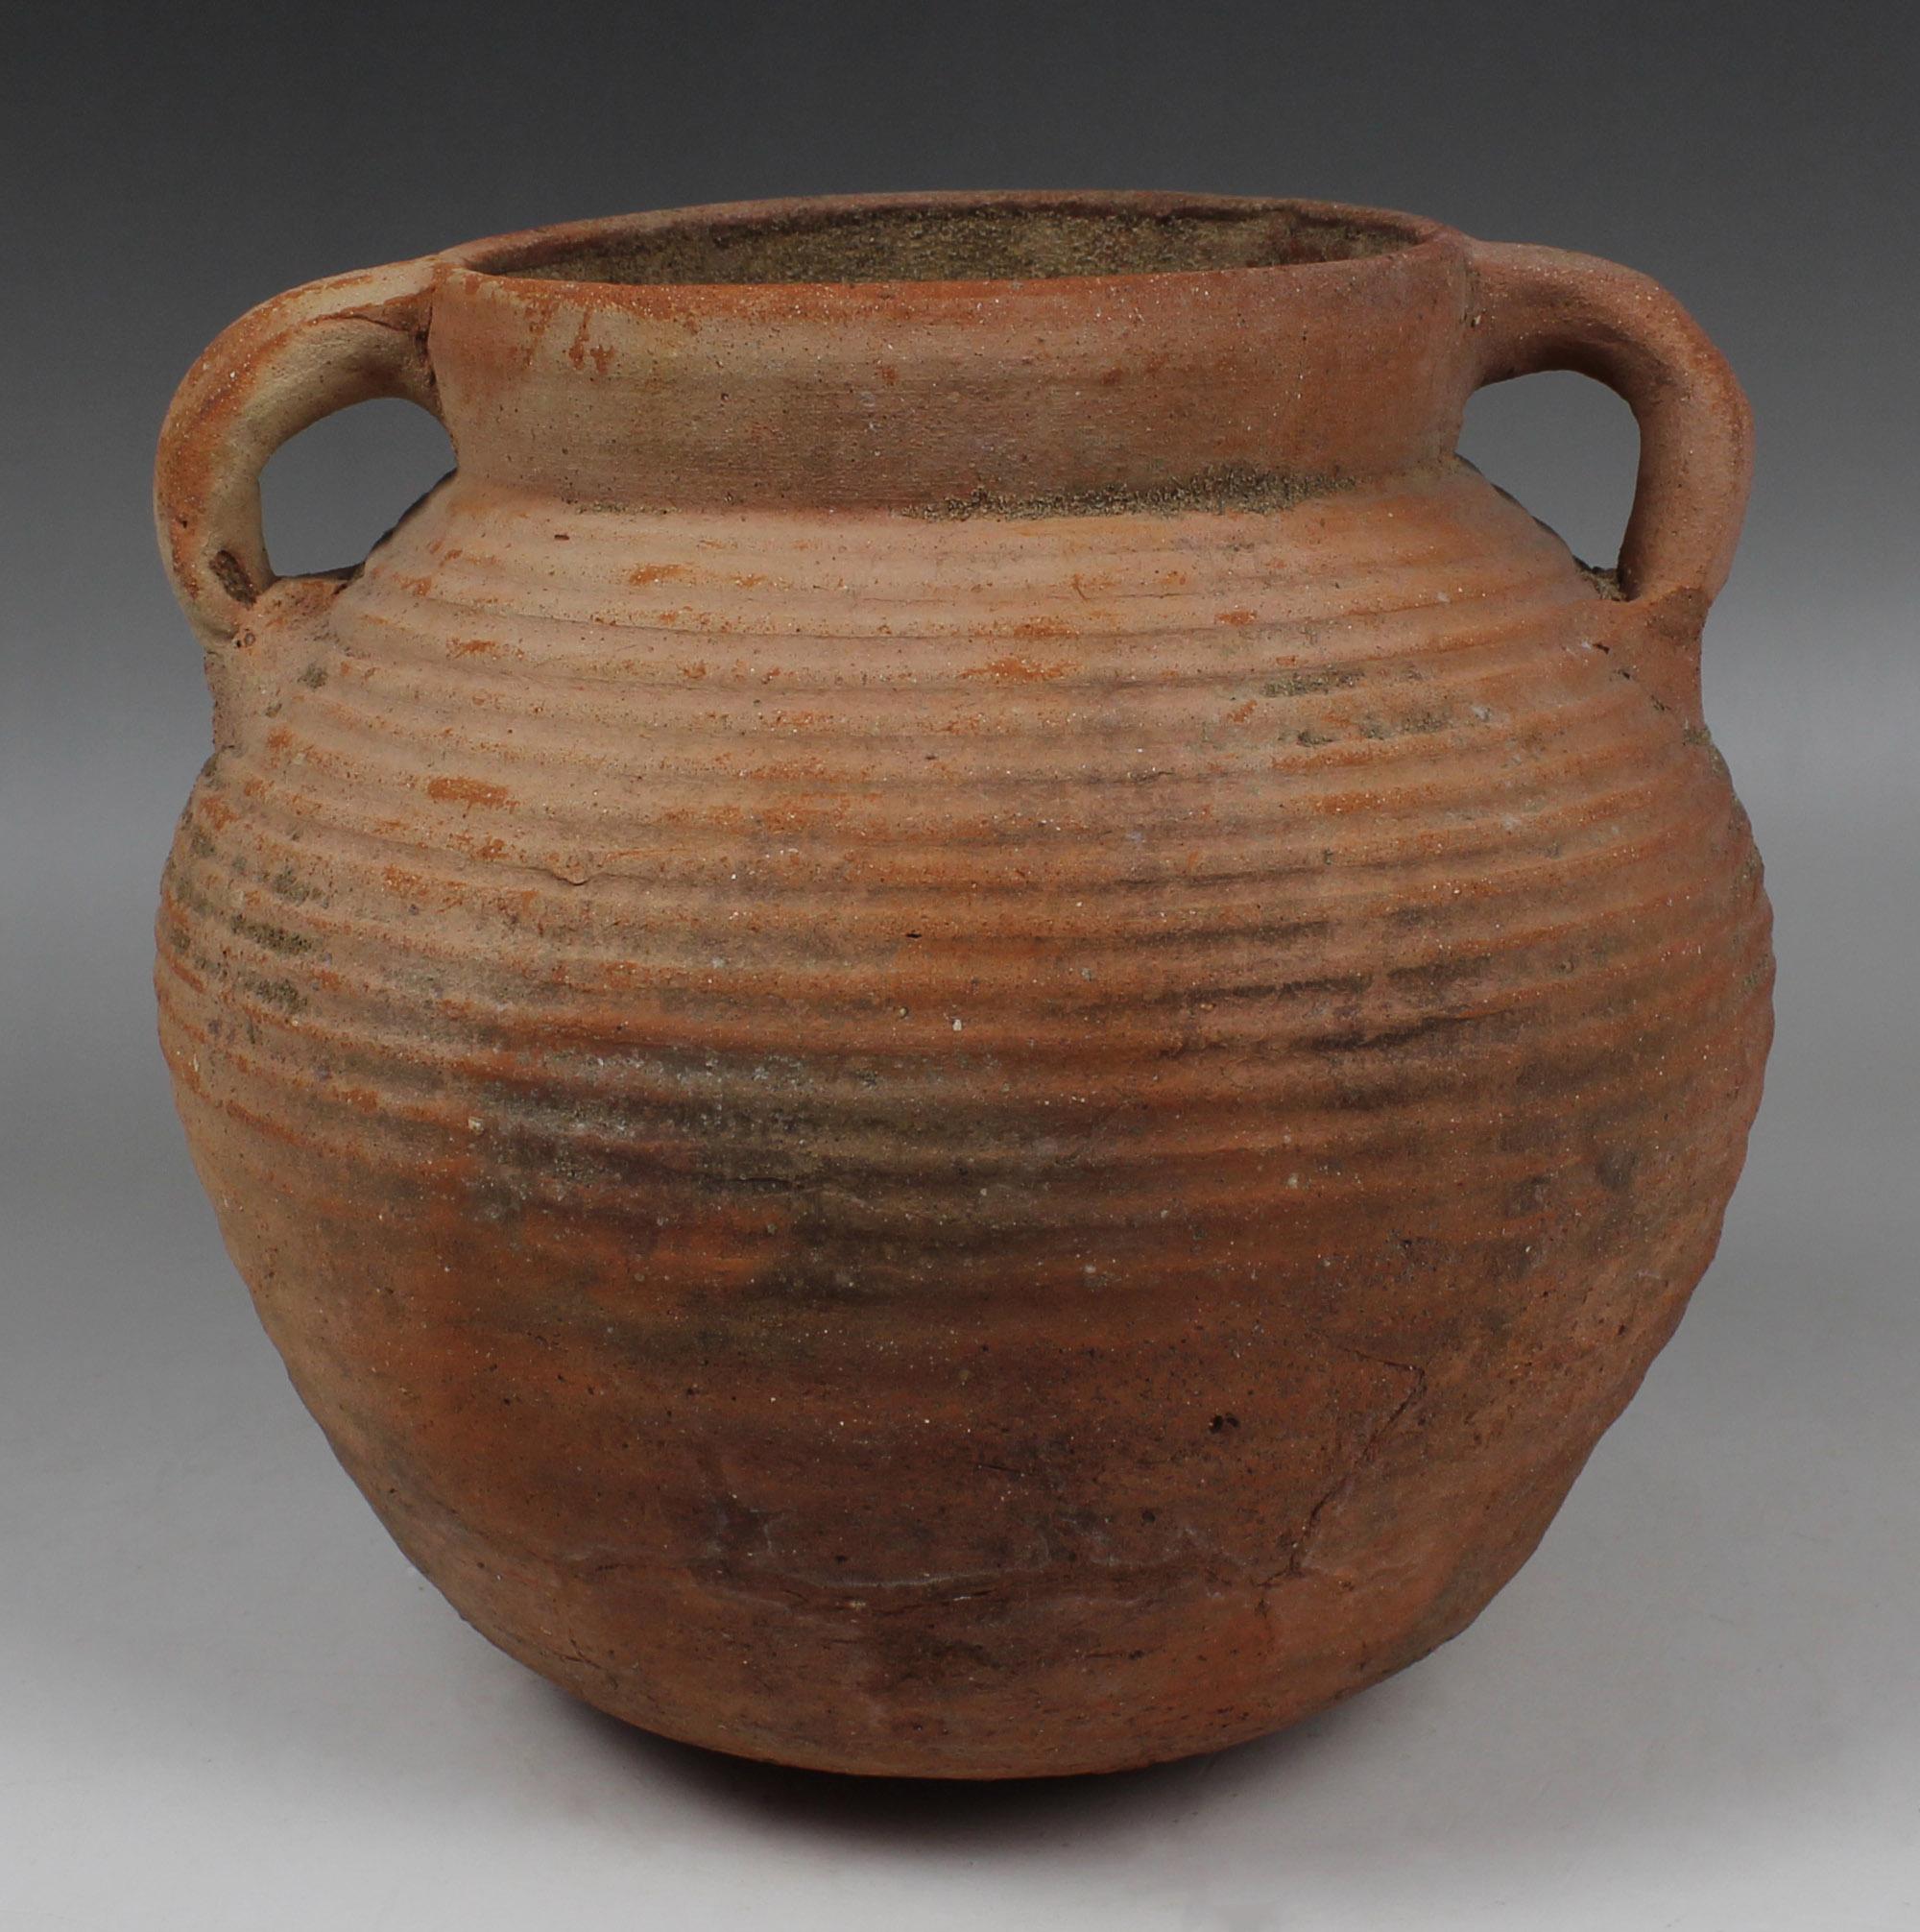 ITEM: Cooking pot, Type ‘Kedera’
MATERIAL: Pottery
CULTURE: Roman, Judaea
PERIOD: 1st Century A.D
DIMENSIONS: 175 mm x 190 mm diameter
CONDITION: Good condition, repaired
PROVENANCE: Ex Emeritus collection (USA), collected from the 1950’s to the